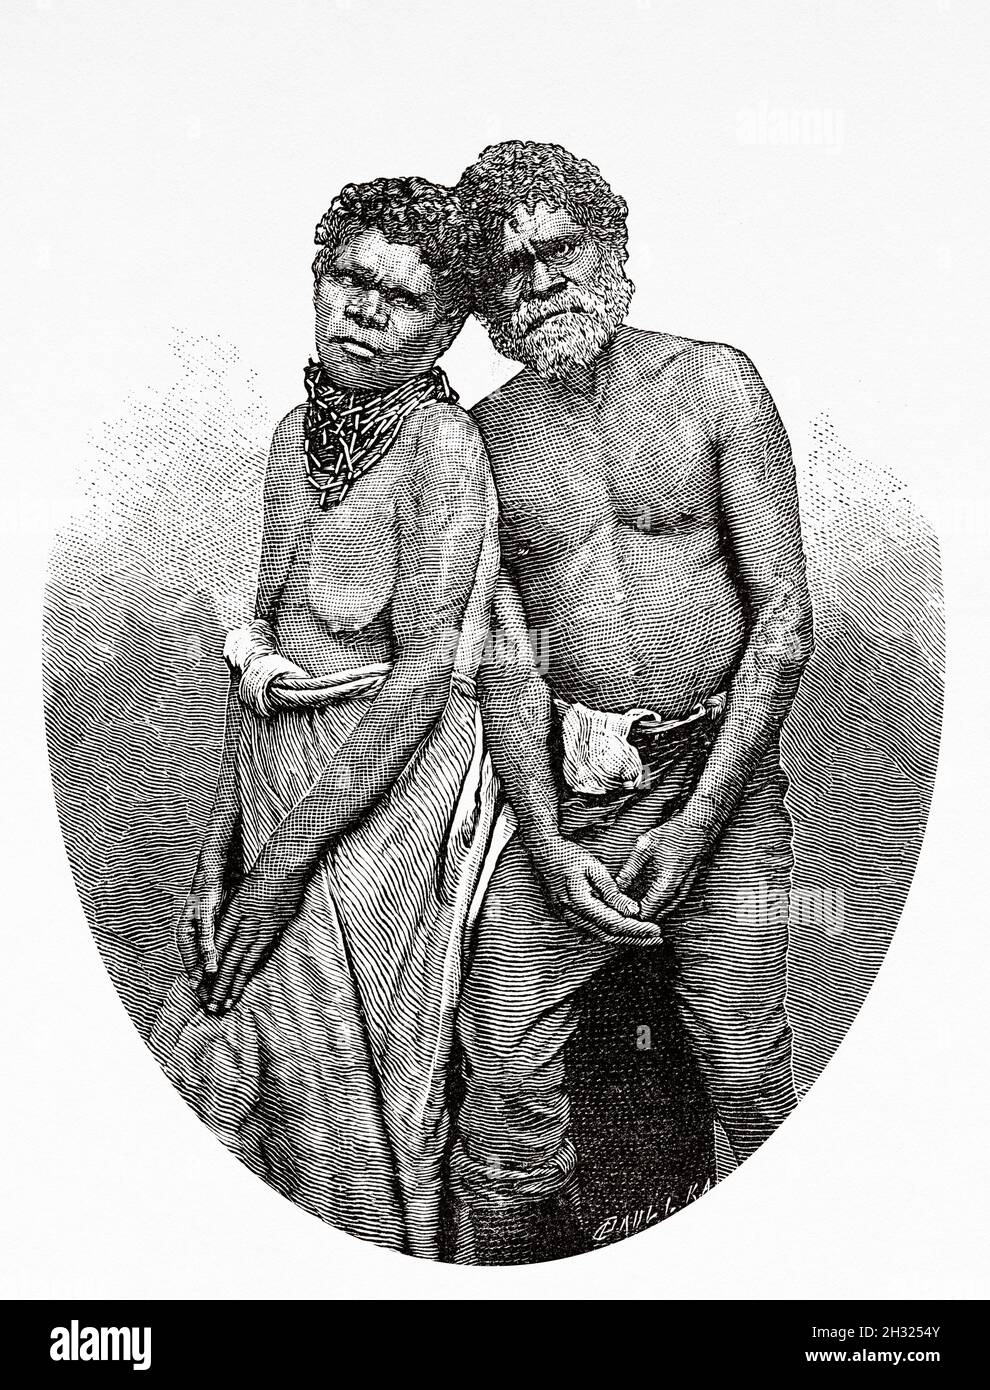 Townsville Native Australian Indian man and woman. Queensland, Australia. Old 19th century engraved illustration, Journey to Northeast Australia by Carl Lumholtz 1880-1884 from Le Tour du Monde 1889 Stock Photo